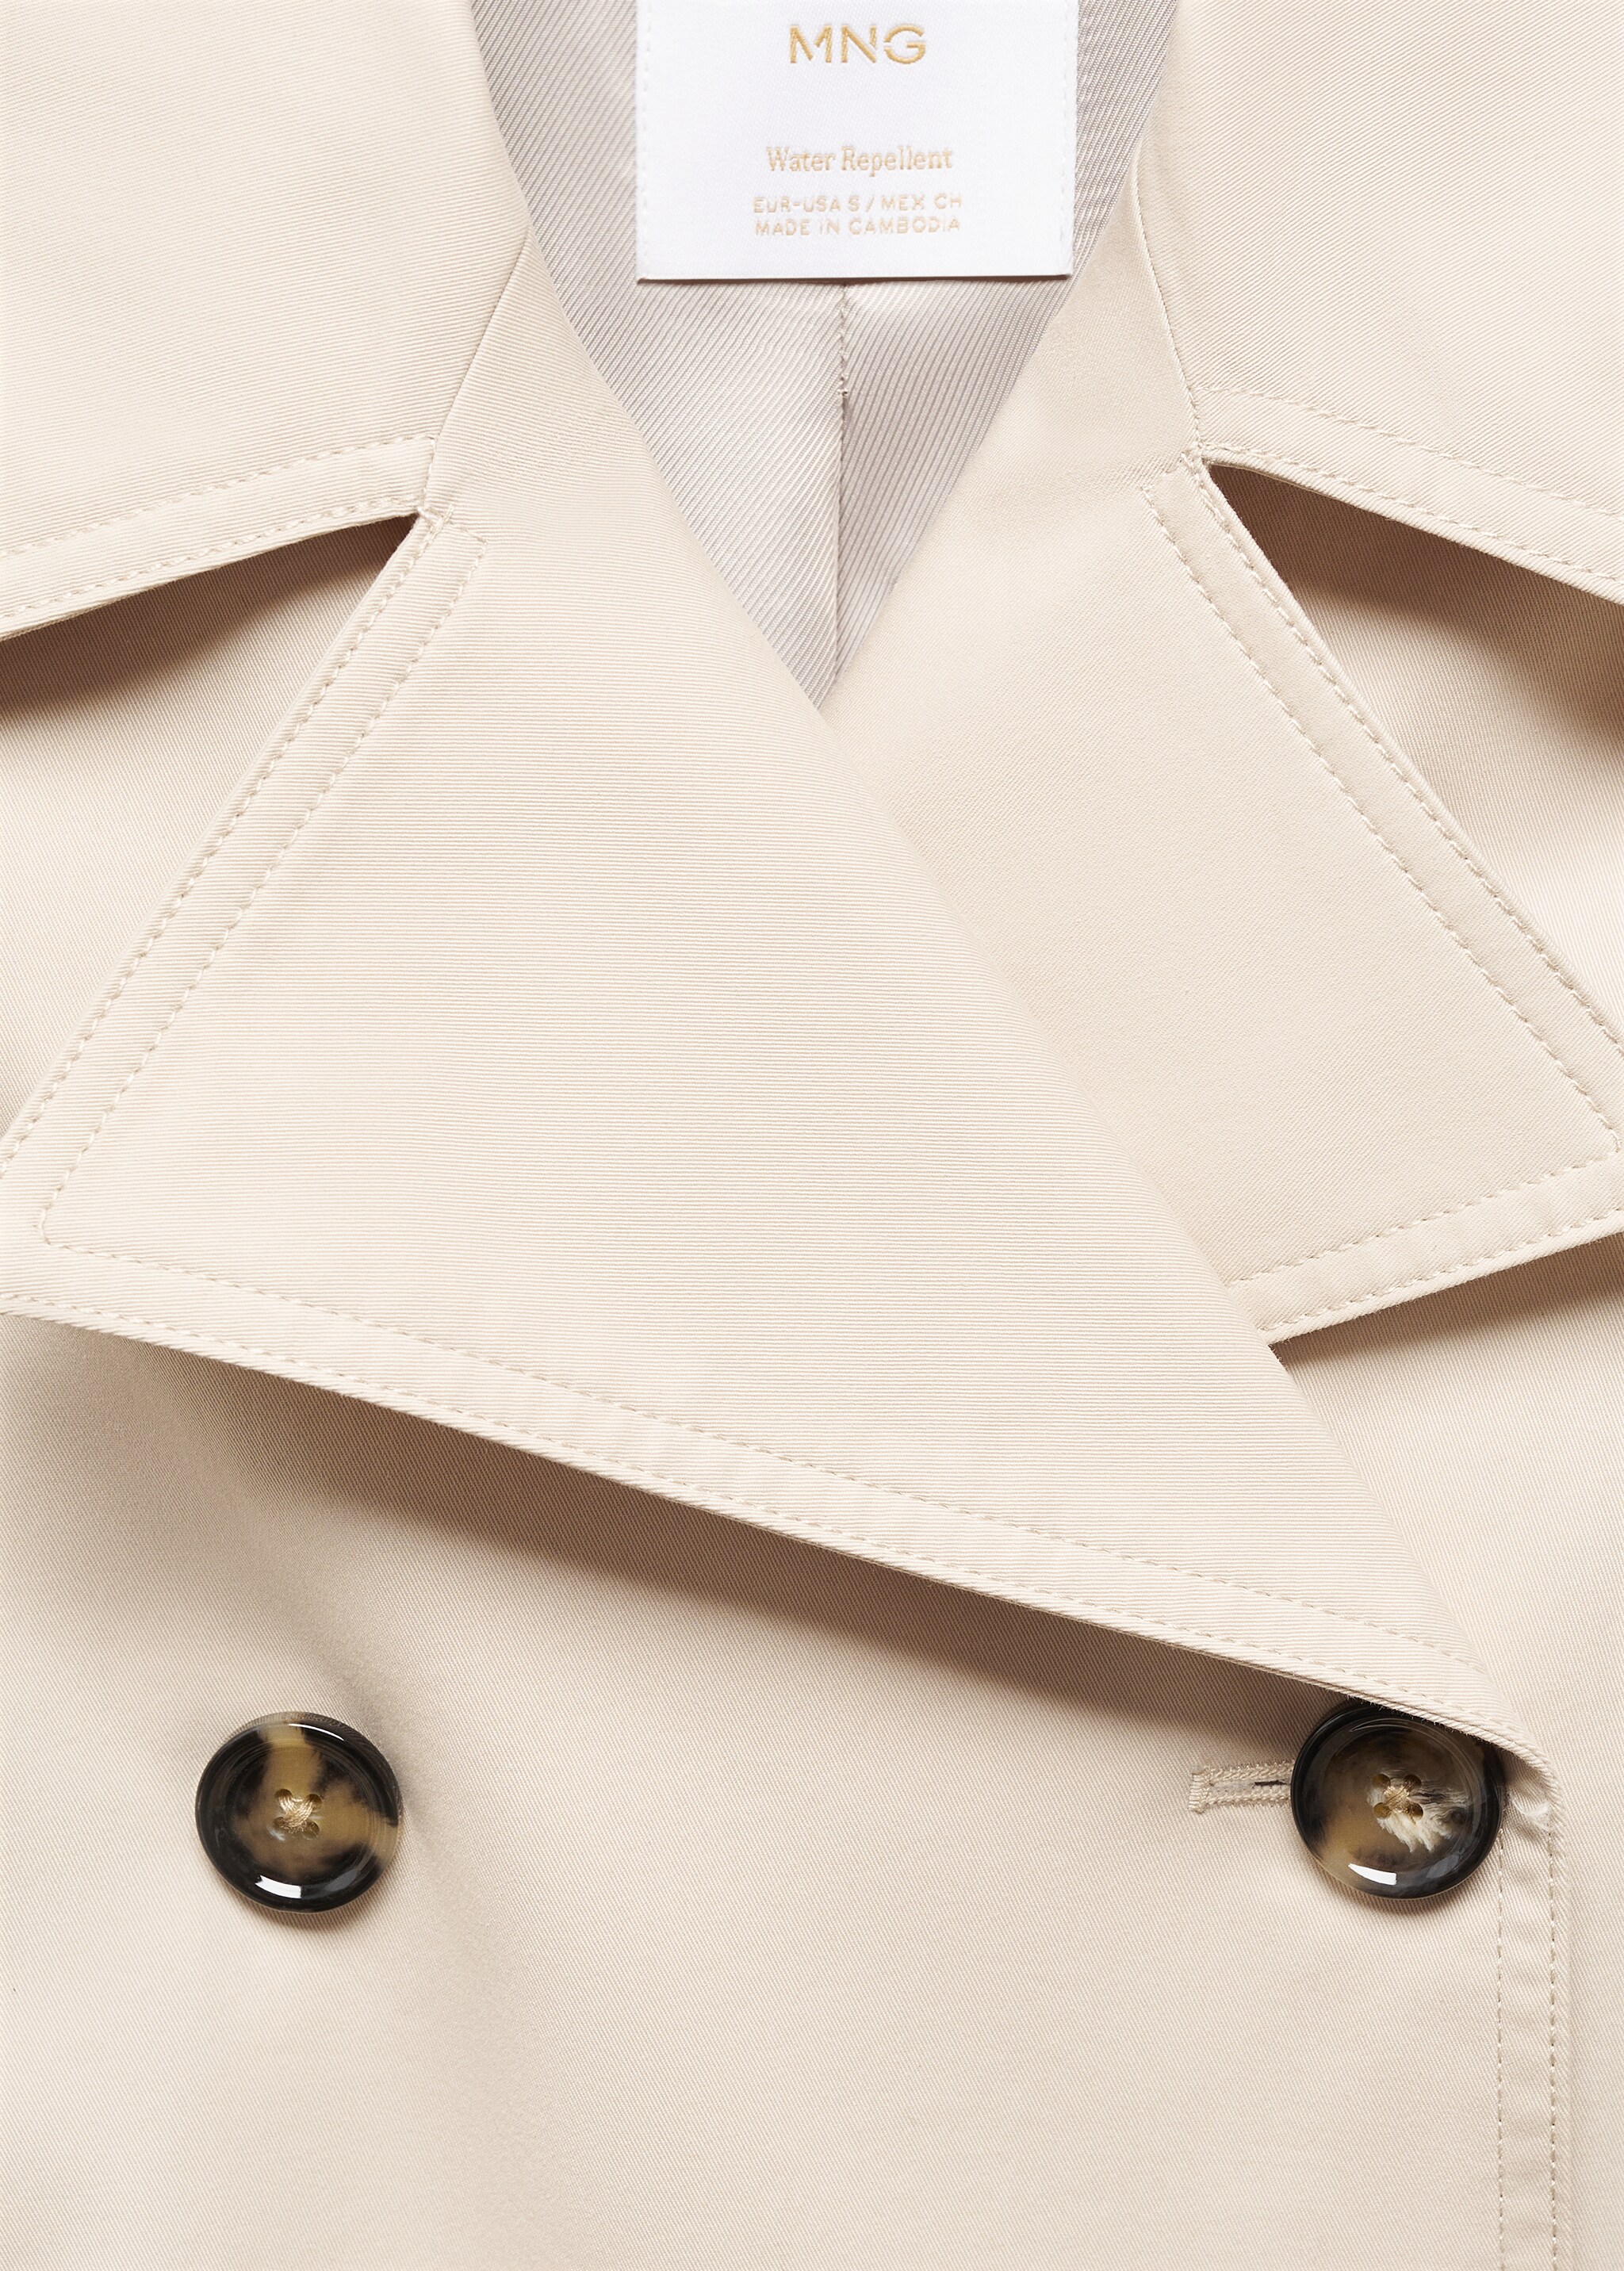 Double-button trench coat - Details of the article 8